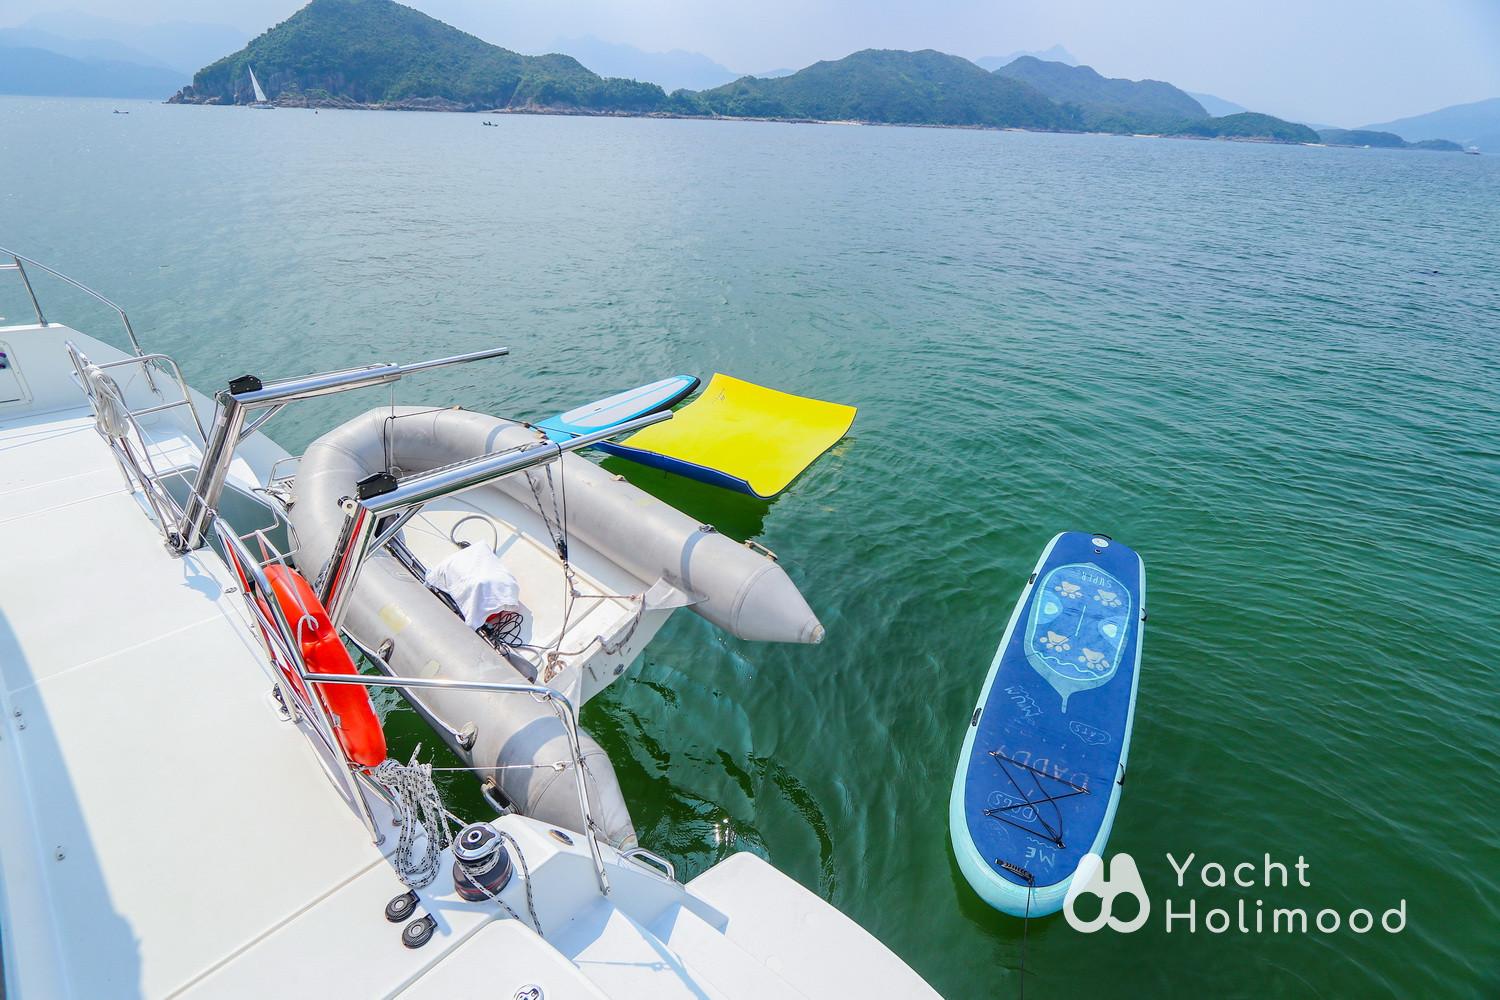 SL03 48-Hour Lagoon 450F 8-hour Luxury Sailing Day Trip (Pick Up at Sai Kung) 8